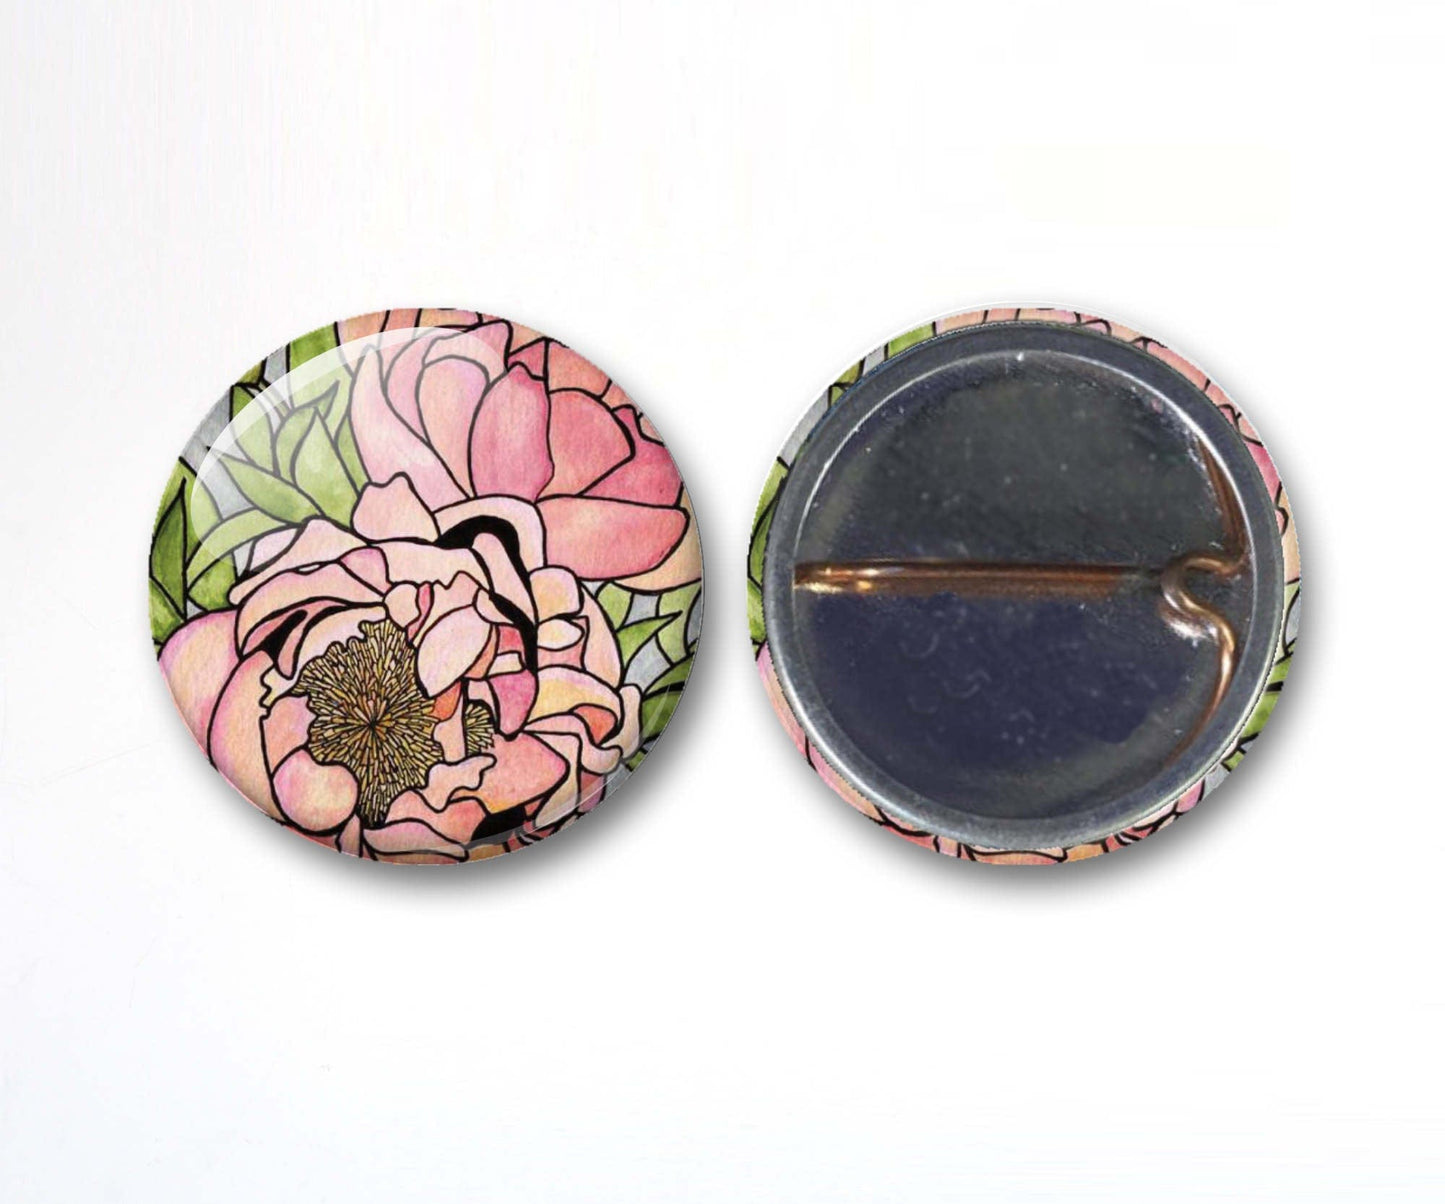 PinkPolish Design Buttons "Flowers and Butterflies" Button Pack - 3-Pack Pin Back Button, 1 Inch